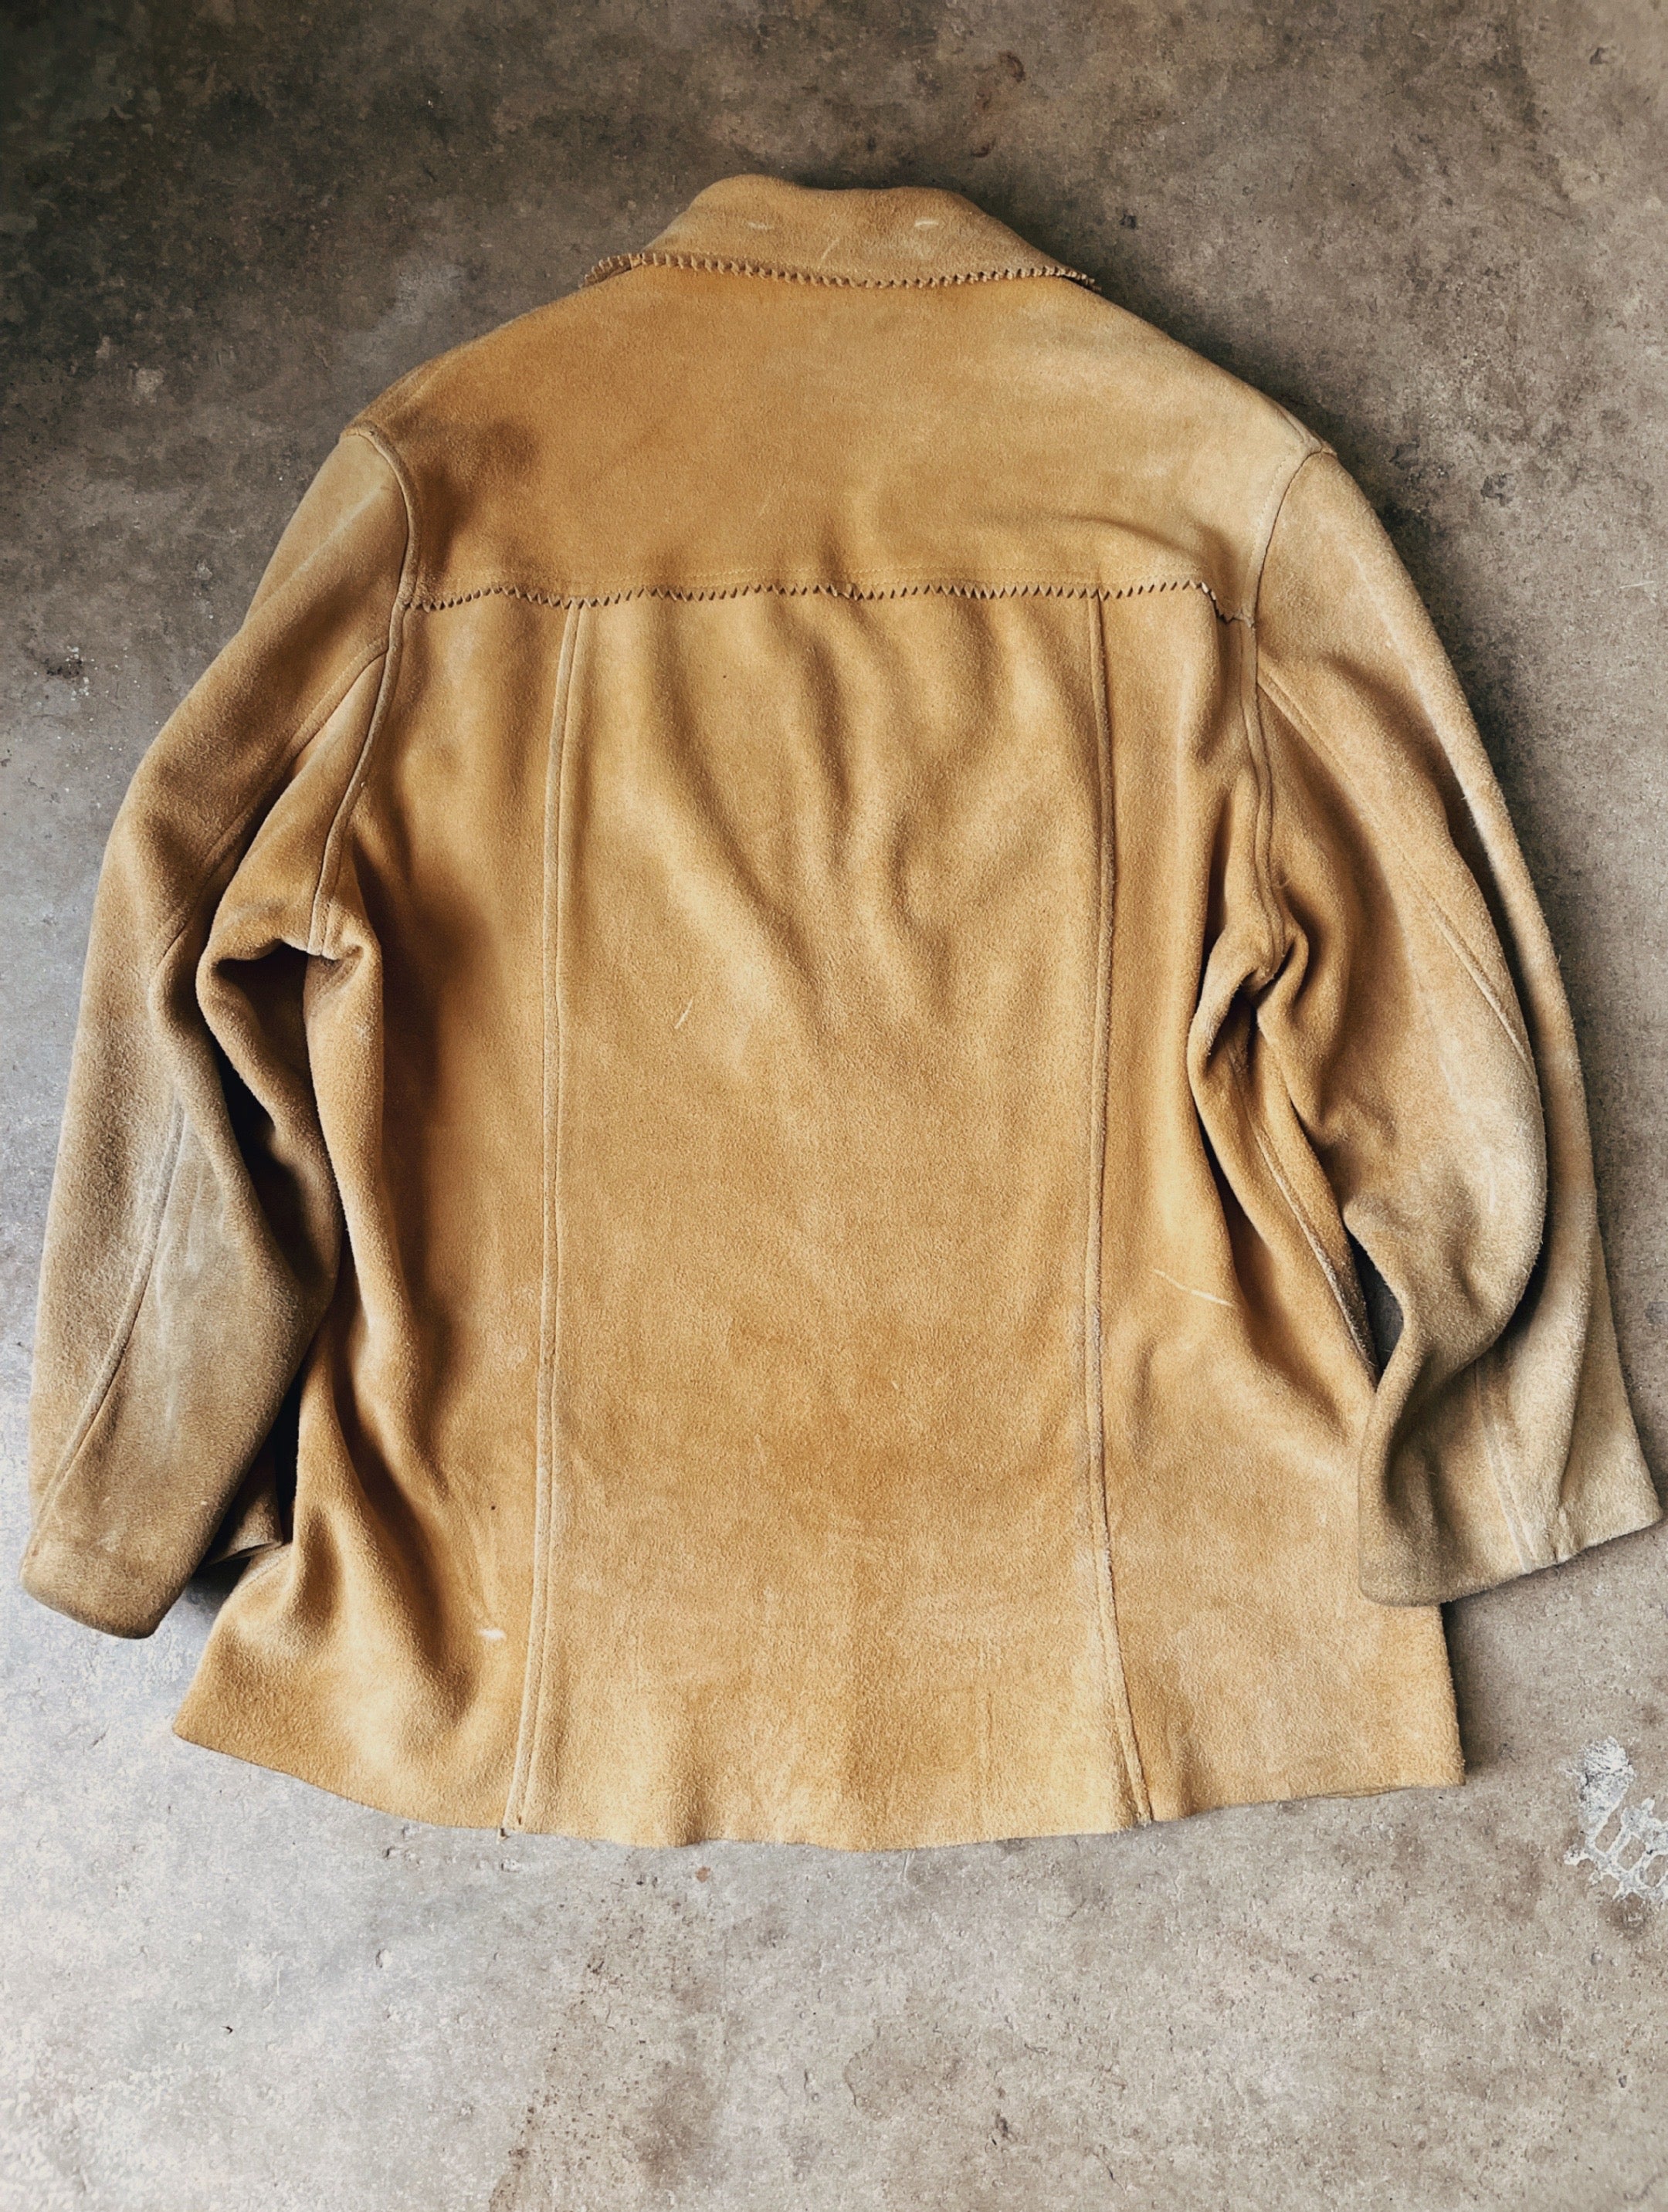 Vintage 'Johnny Yuma' Style Pullover